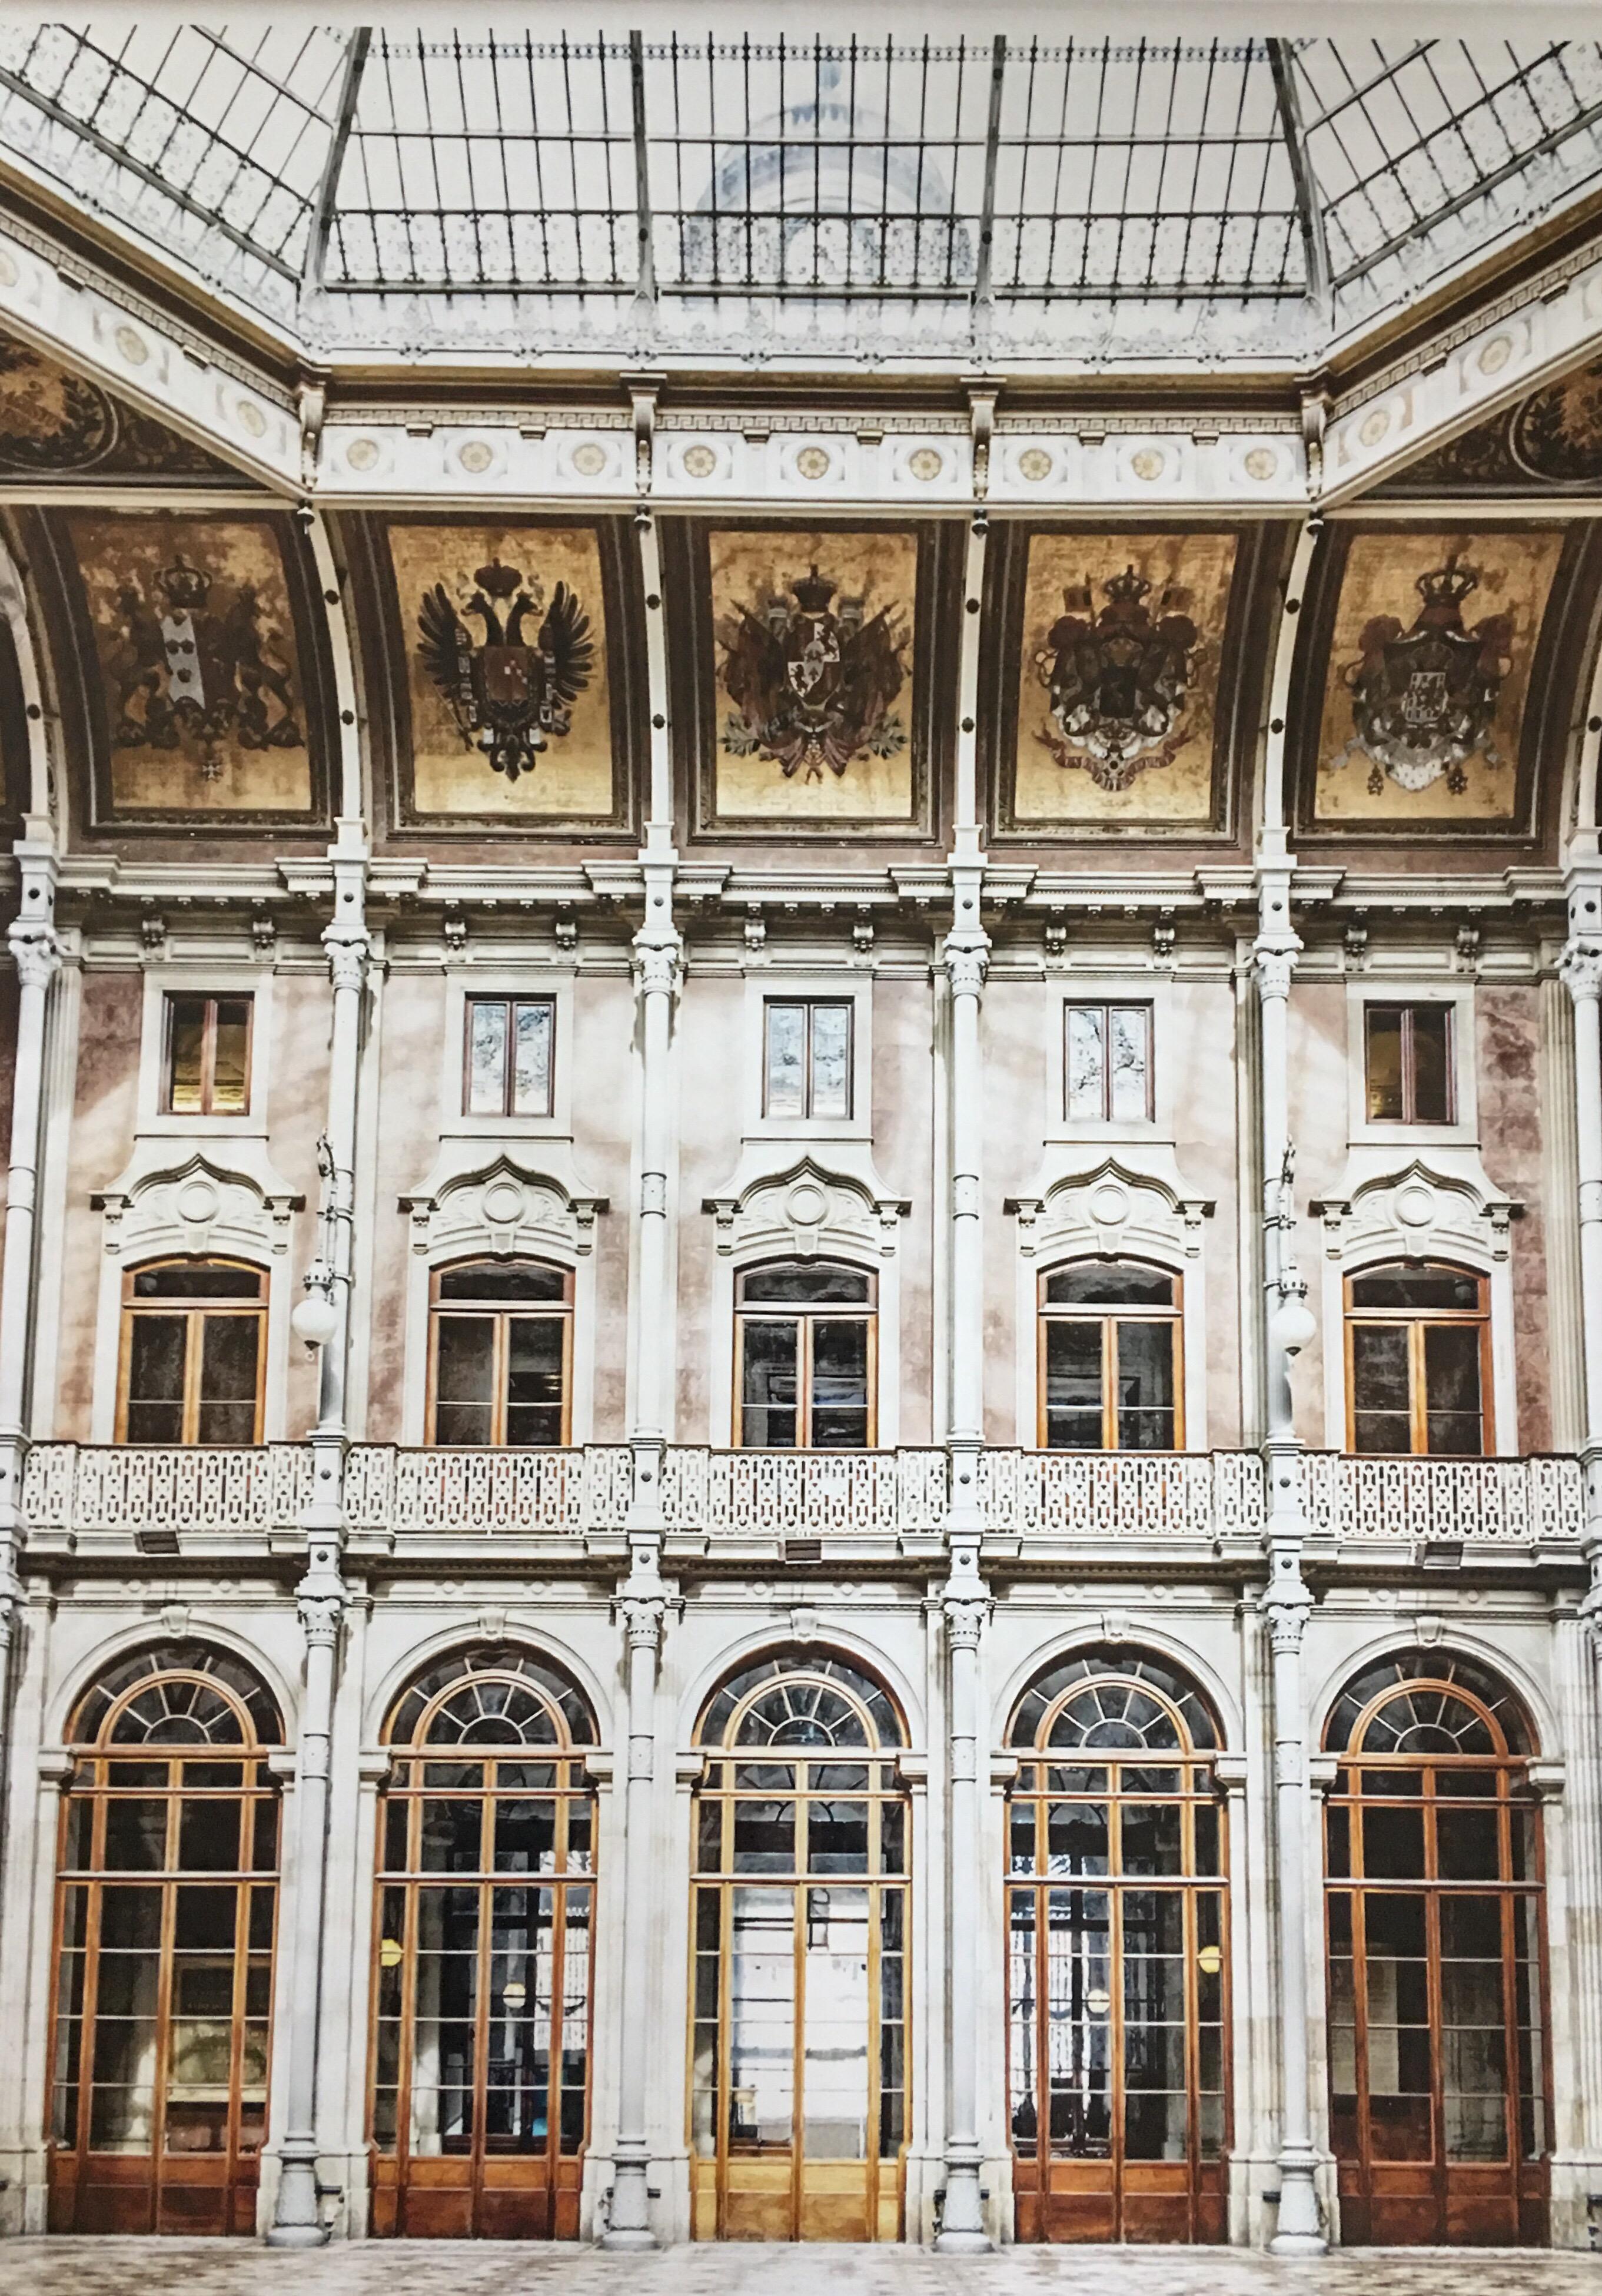 Large interior framed art photograph of the Stock Exchange Palace historical building in Porto, Portugal. The palace was built in the 19th century by the city's Commercial Association in neoclassical style. It is located in the Infante D. Henrique